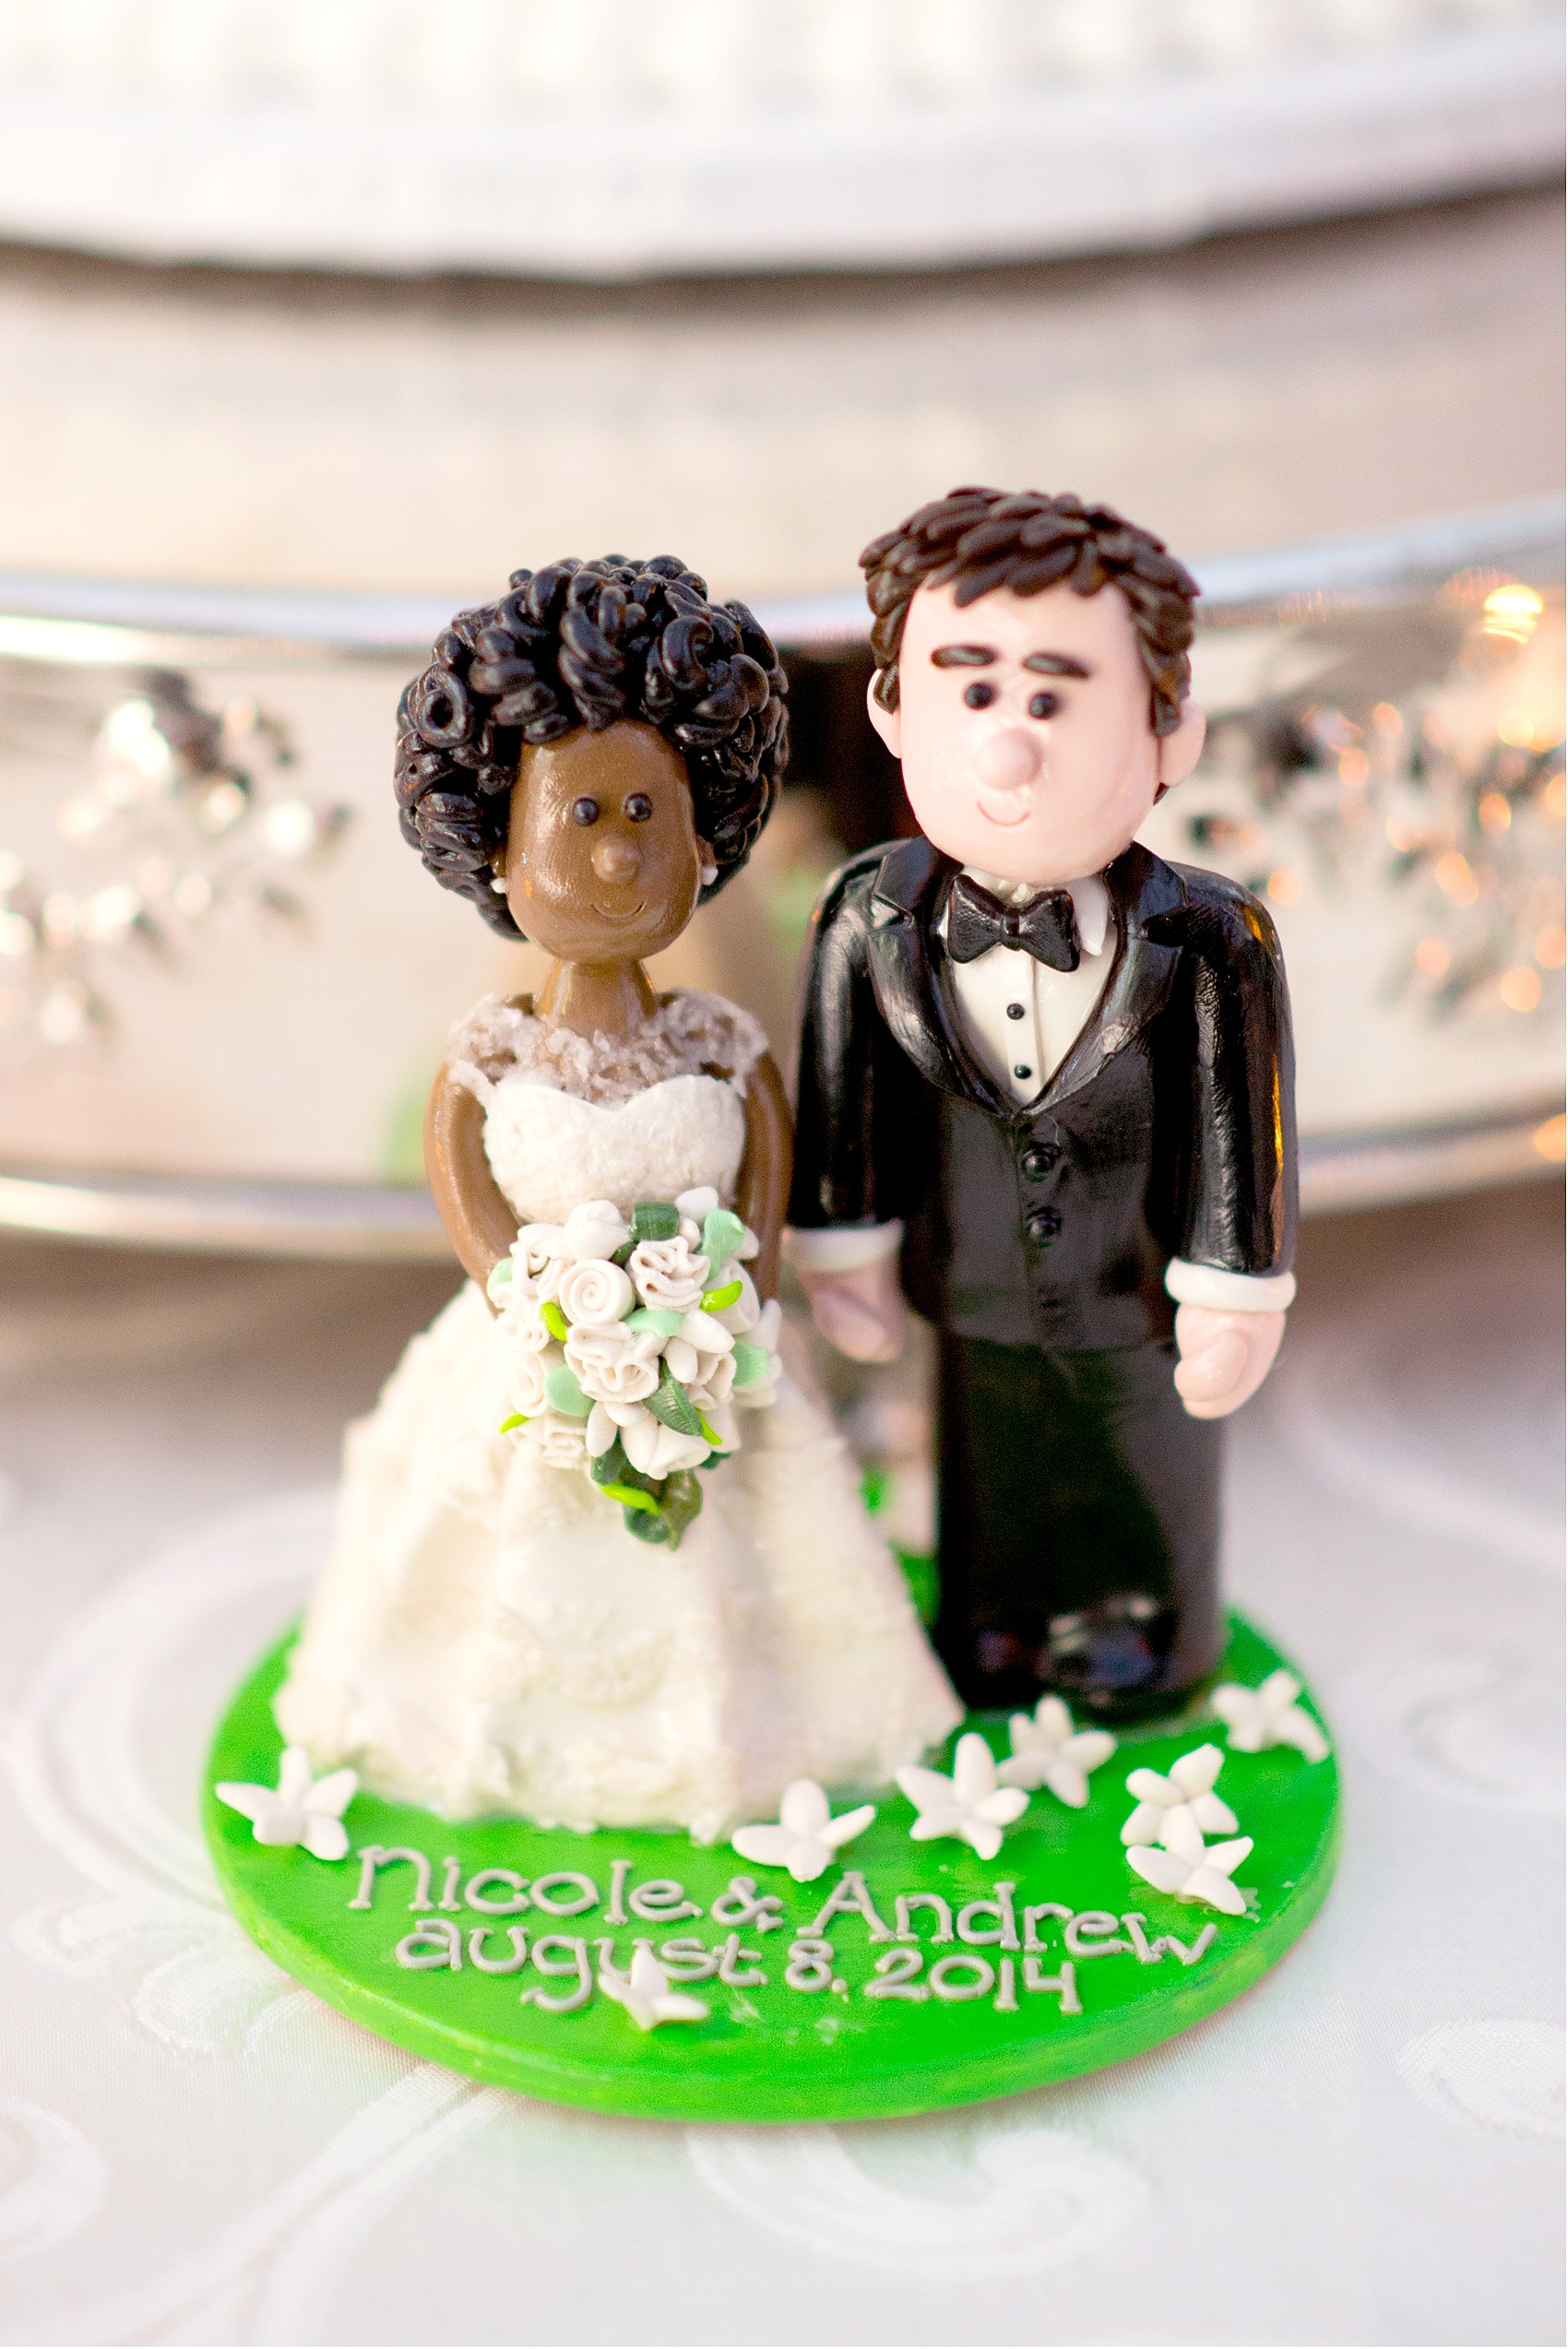 Custom cake topper resembles the bride and groom! Wedding reception at the Conservatory at The Madison Hotel, New Jersey. Photos by Mikkel Paige Photography.